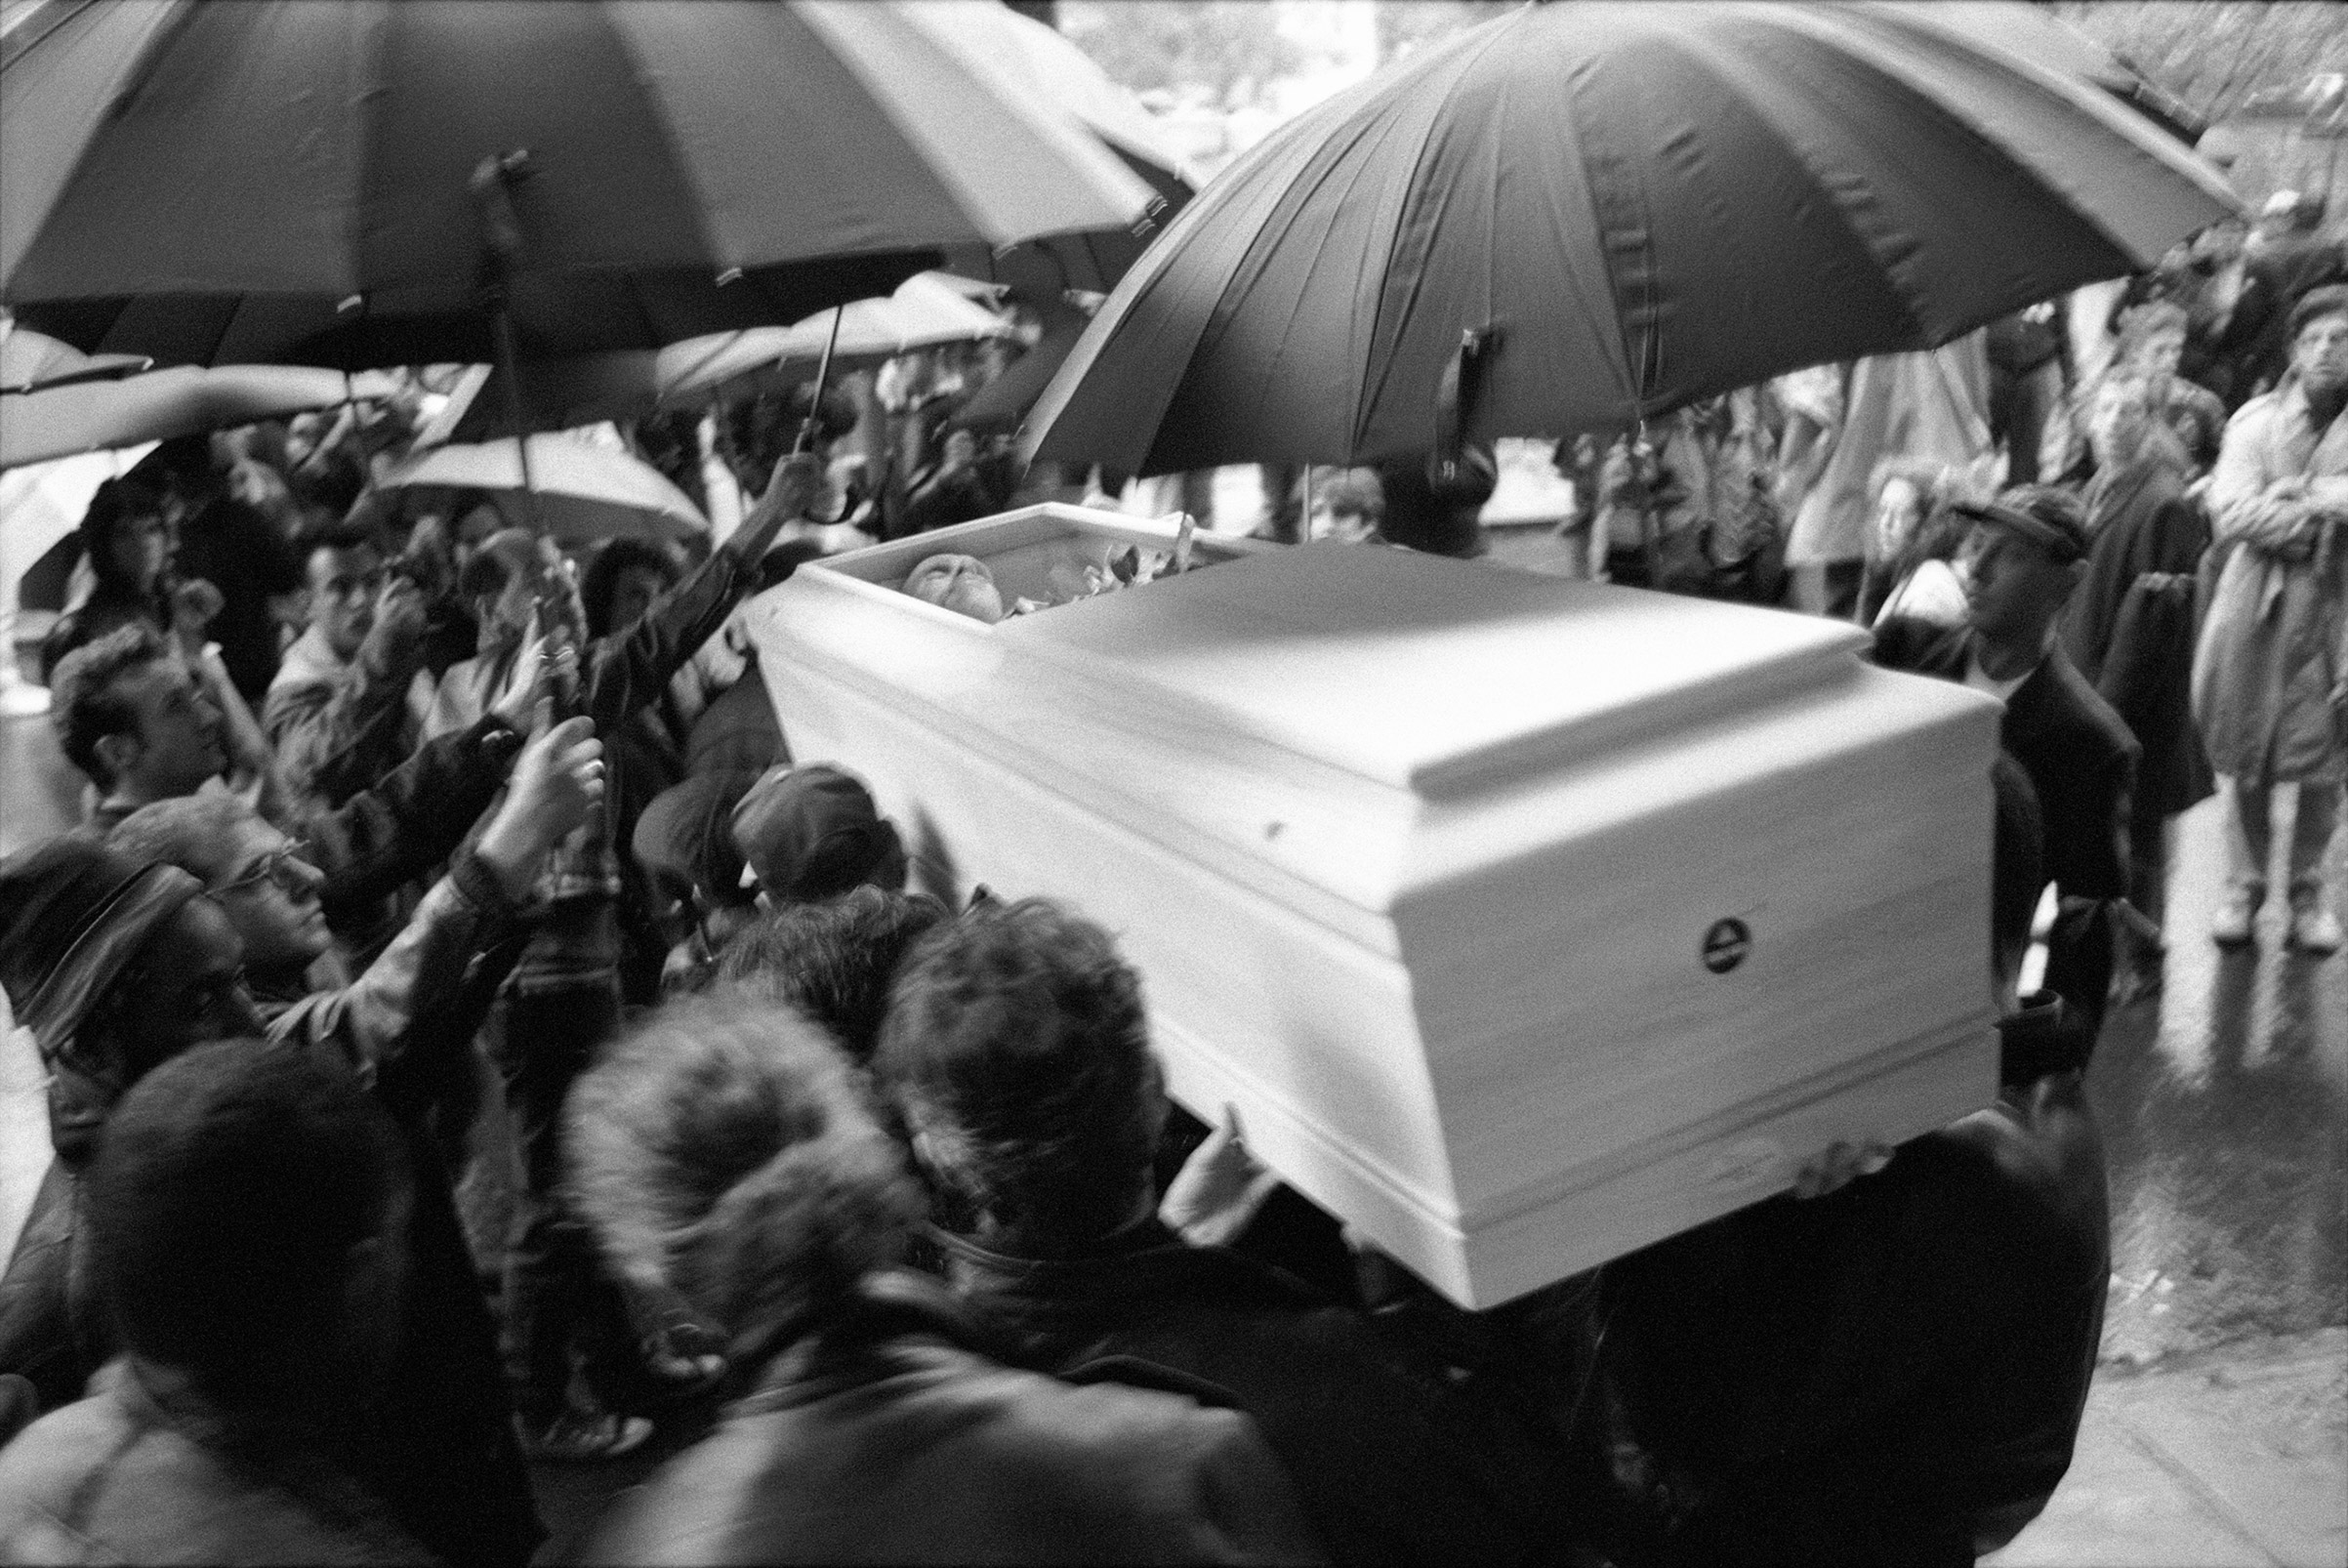 From the ACT UP funeral march carrying the body of Mark L. Fisher from Judson Memorial Church up Sixth Avenue to the Republican National Committee headquarters on the eve of the presidential election, 1992. (Stephen Barker)